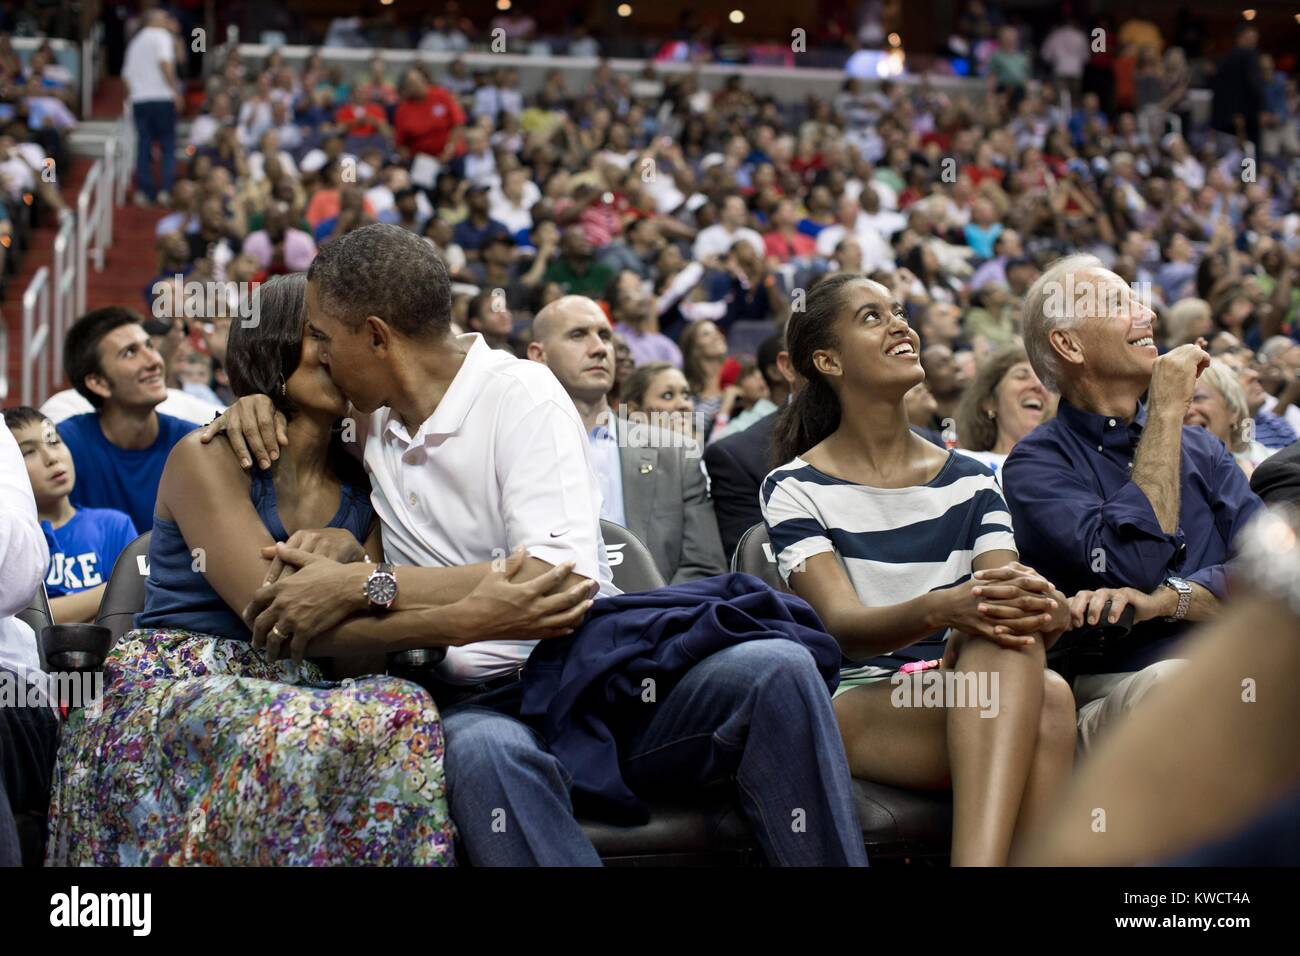 President Barack Obama kisses First Lady Michelle Obama for the 'Kiss Cam'. Malia and Joe Biden watch the kiss on Jumbotron screens the Verizon Center in Washington, D.C. July 16, 2012. They were attending the U.S. Men's Olympic basketball team's game against Brazil. (BSLOC 2015 3 25) Stock Photo